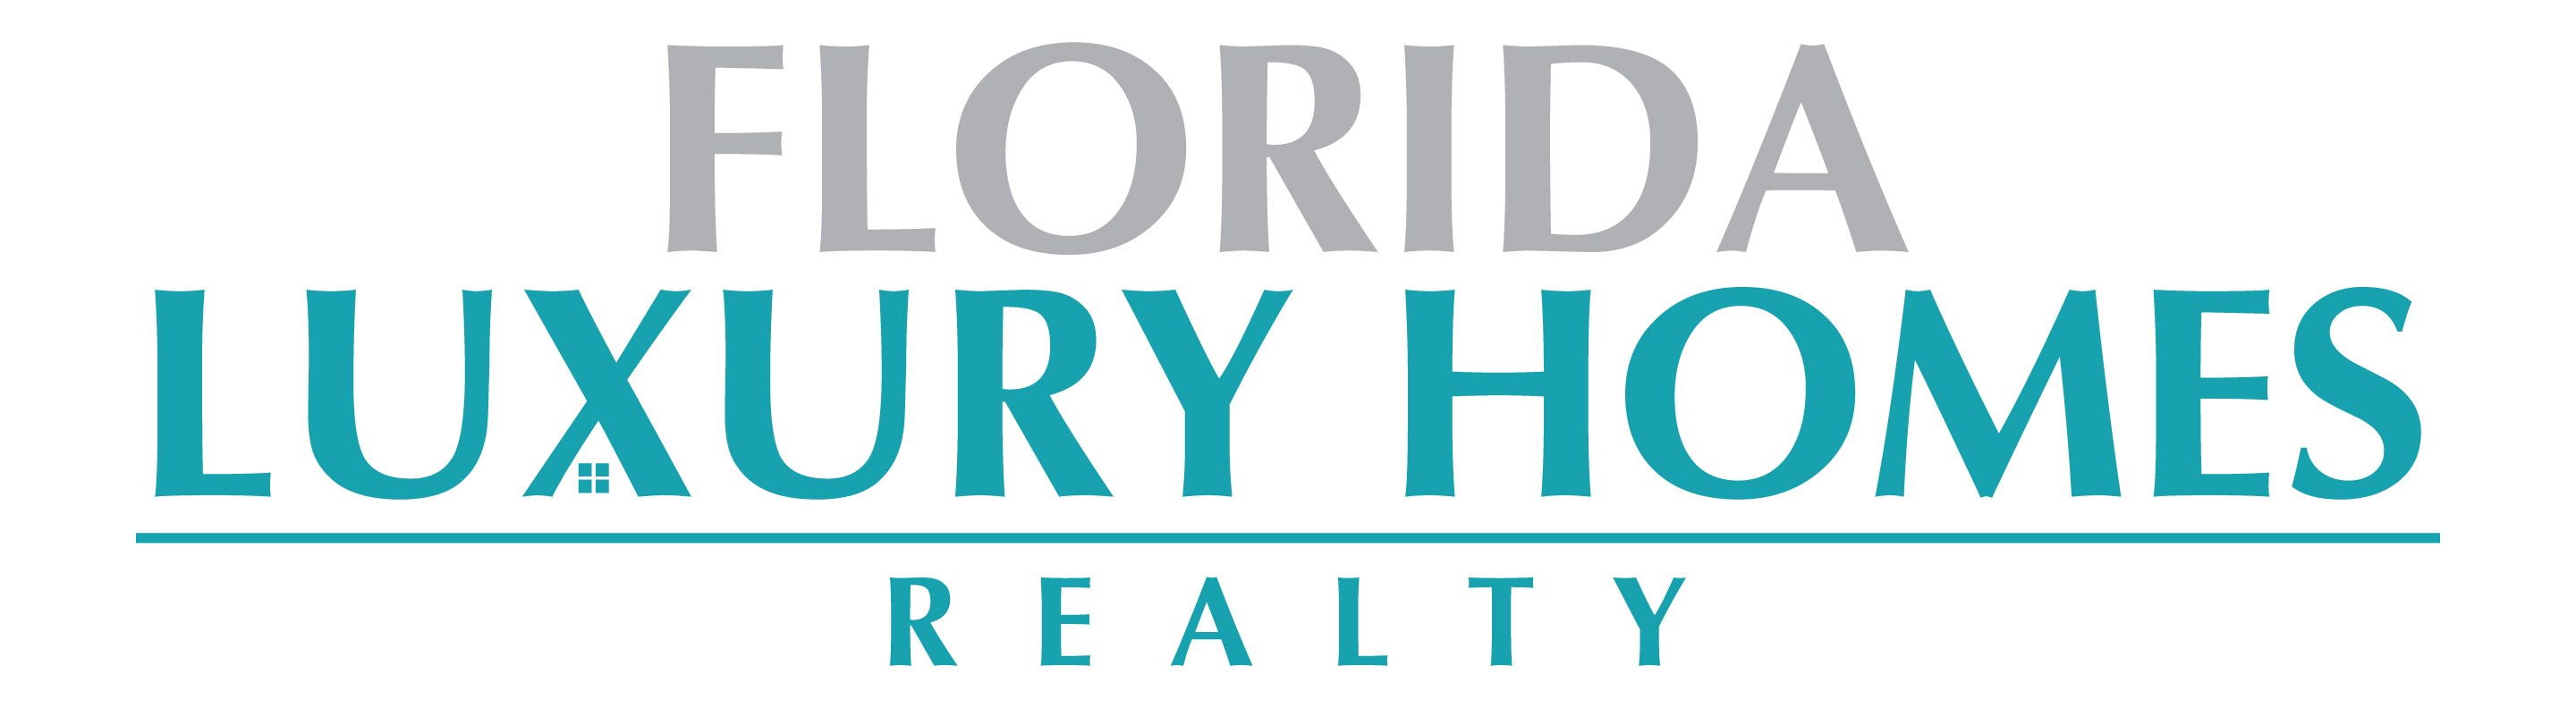 Florida Luxury Homes Realty